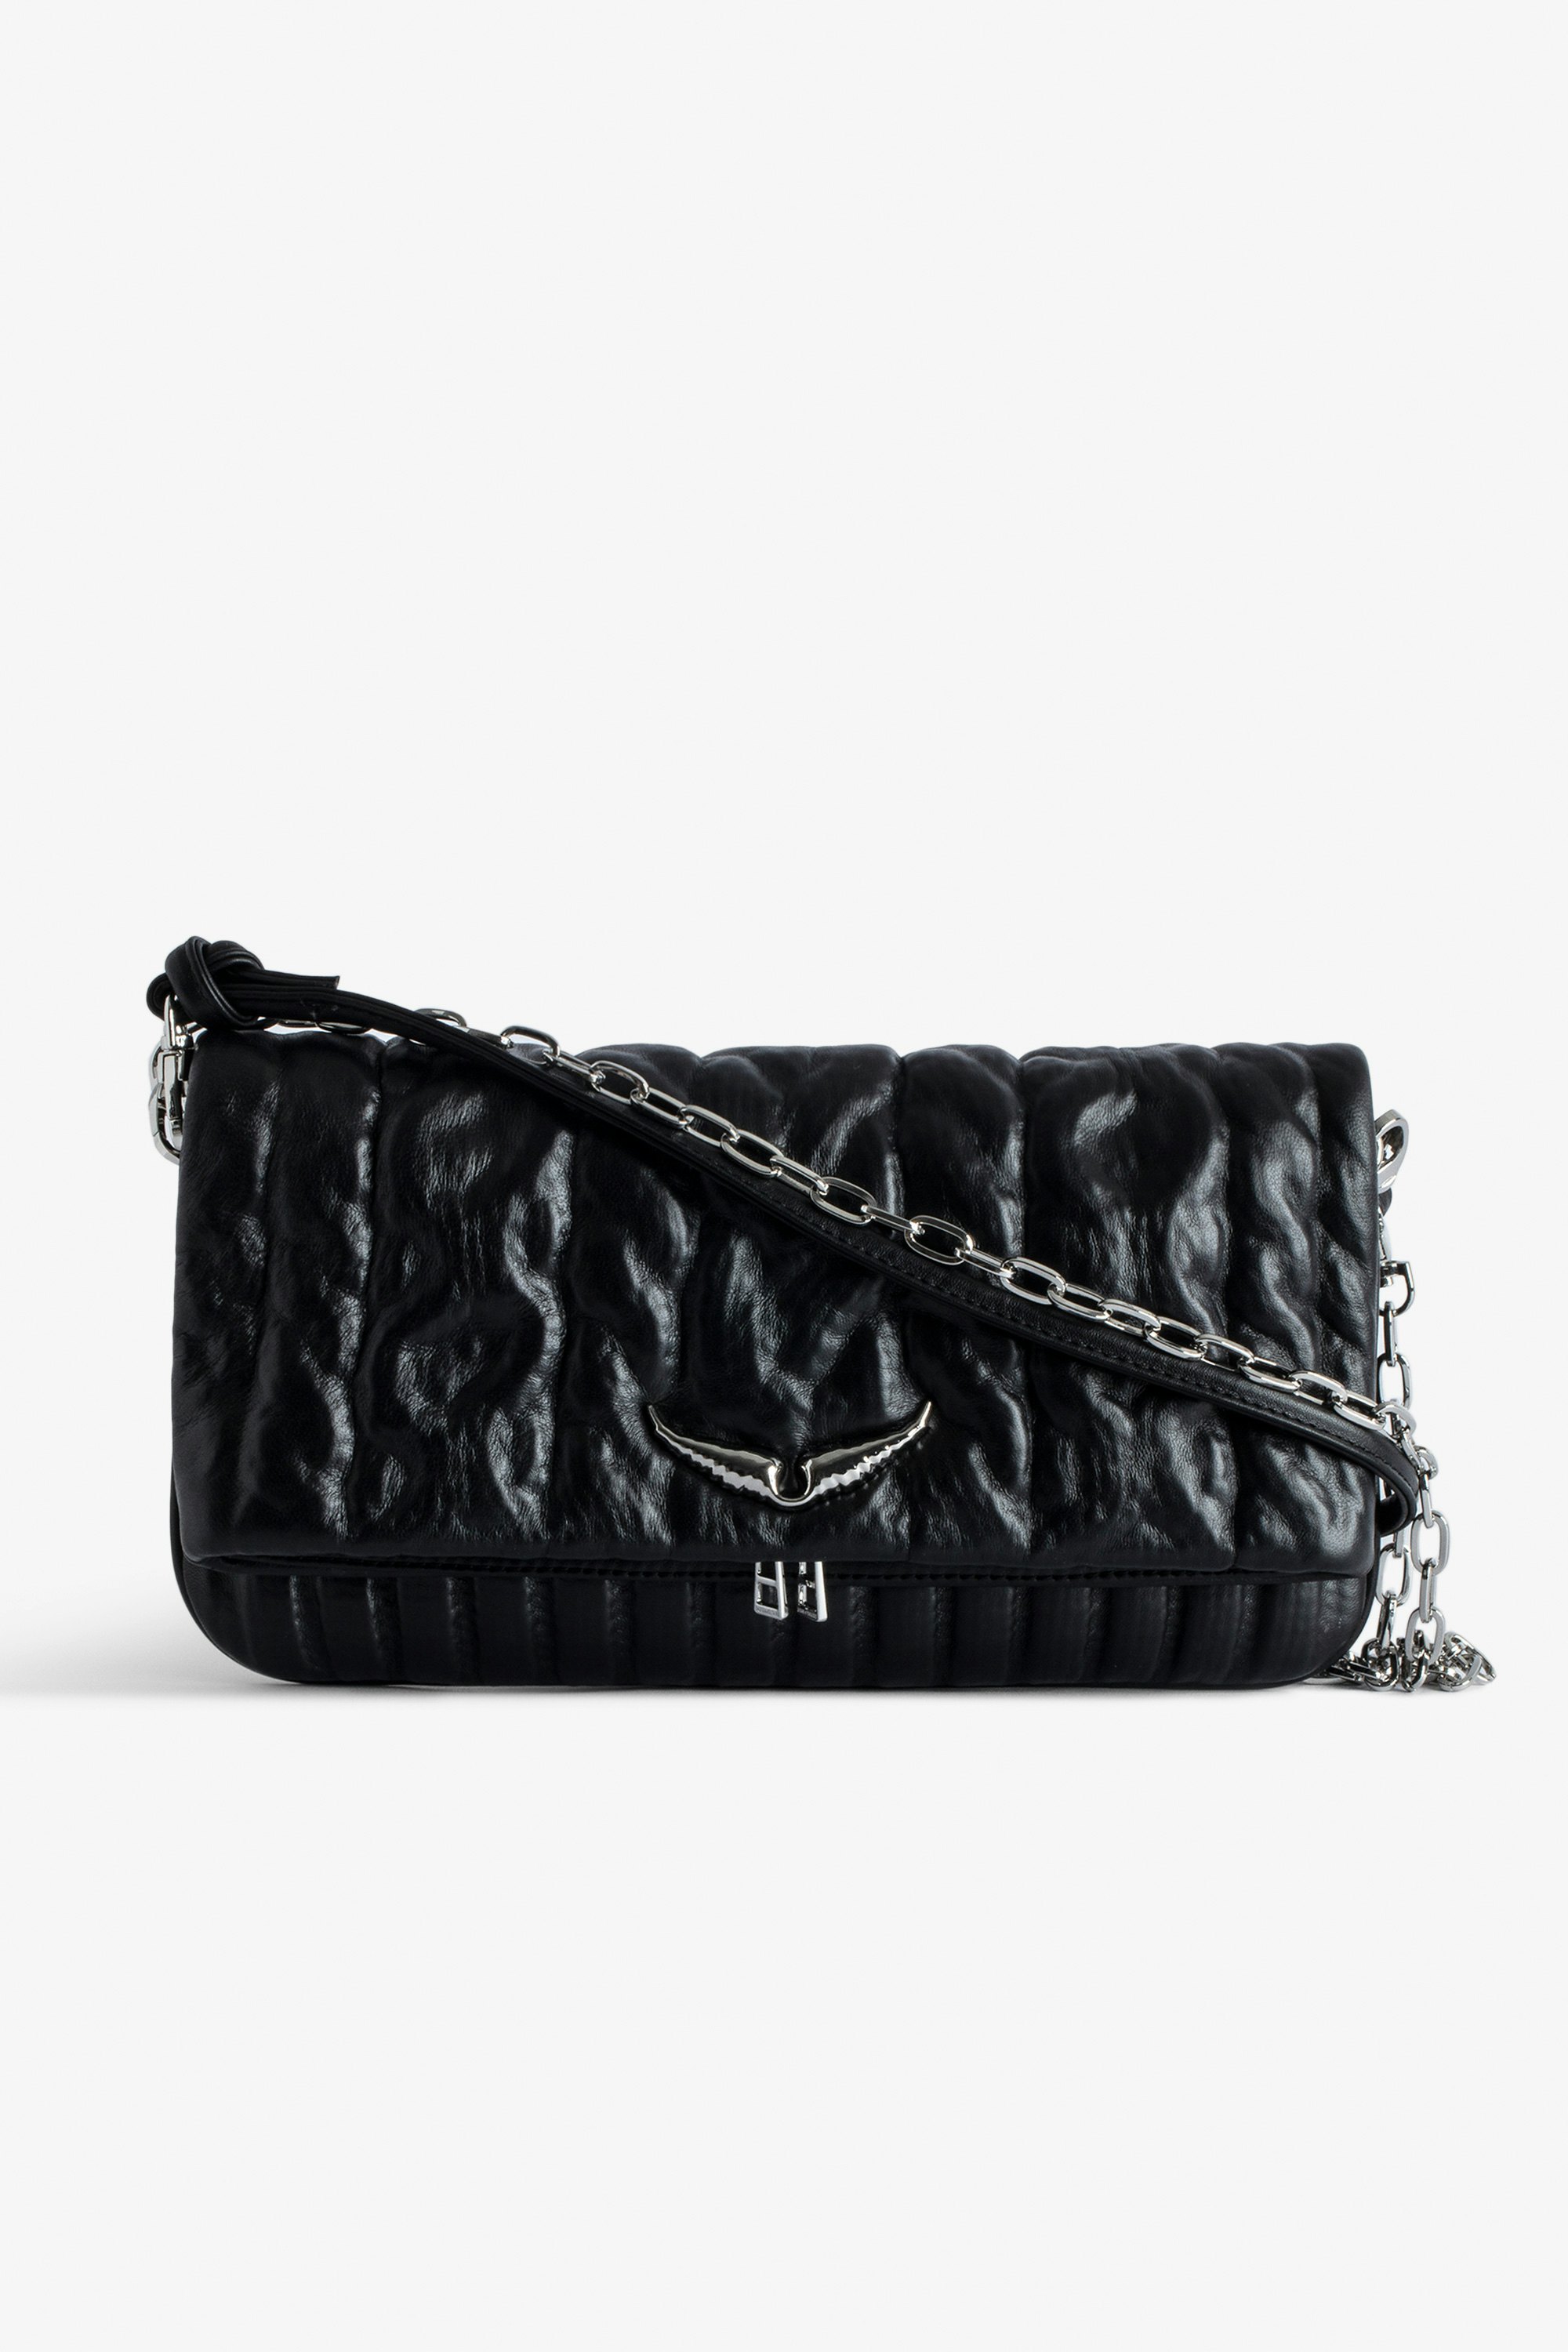 Rock Eternal Knit Shadow Clutch - Women’s black knit-effect leather clutch with tied shoulder strap, chain and wings.